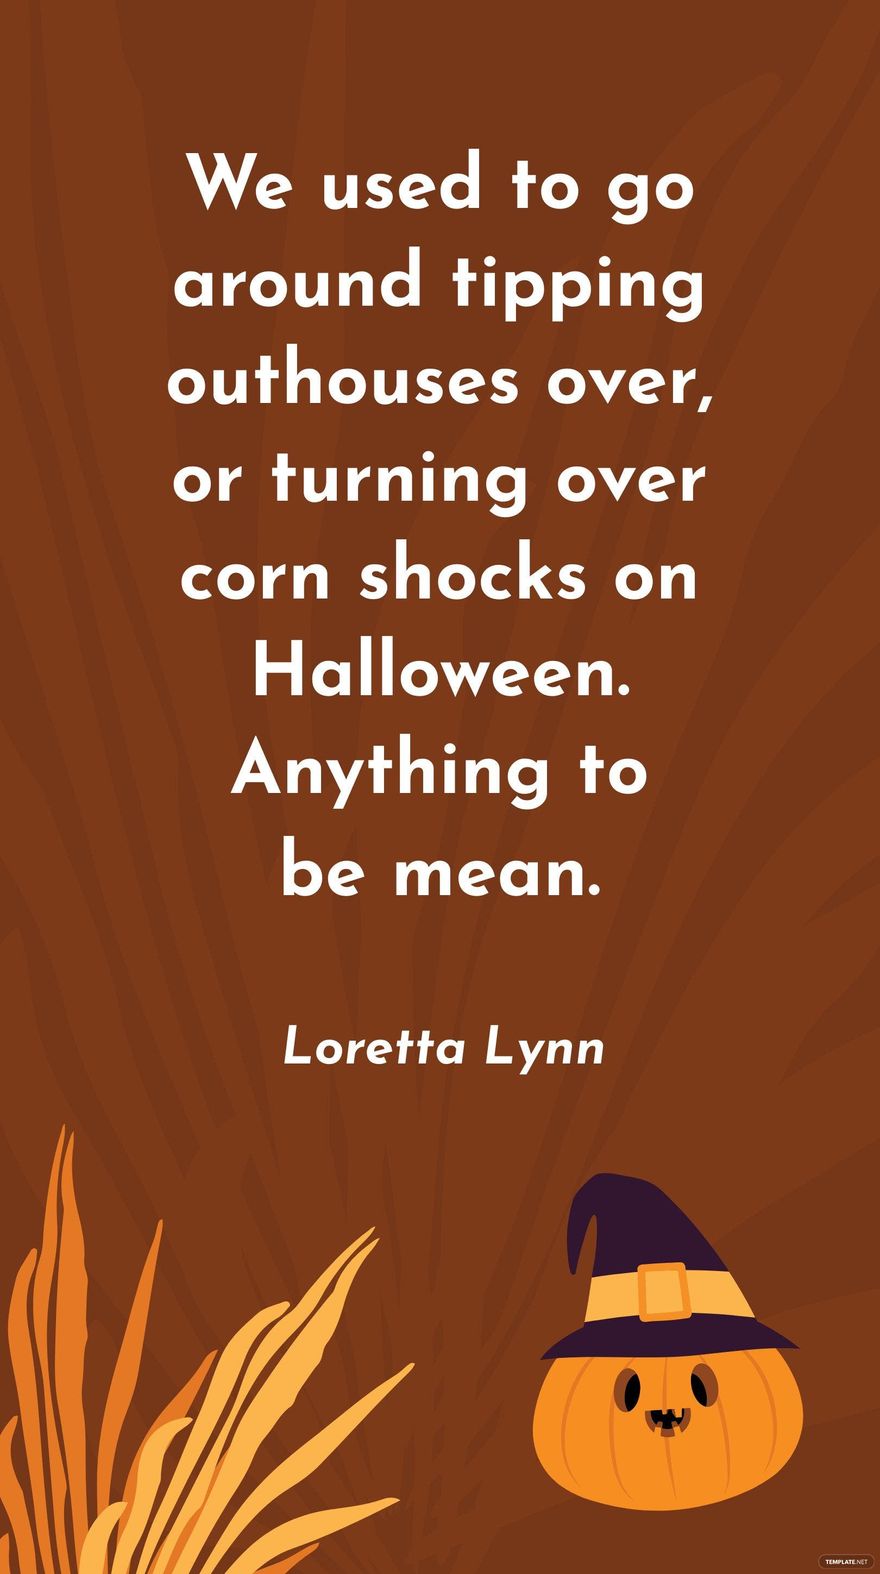 Free Loretta Lynn - We used to go around tipping outhouses over, or turning over corn shocks on Halloween. Anything to be mean. in JPG